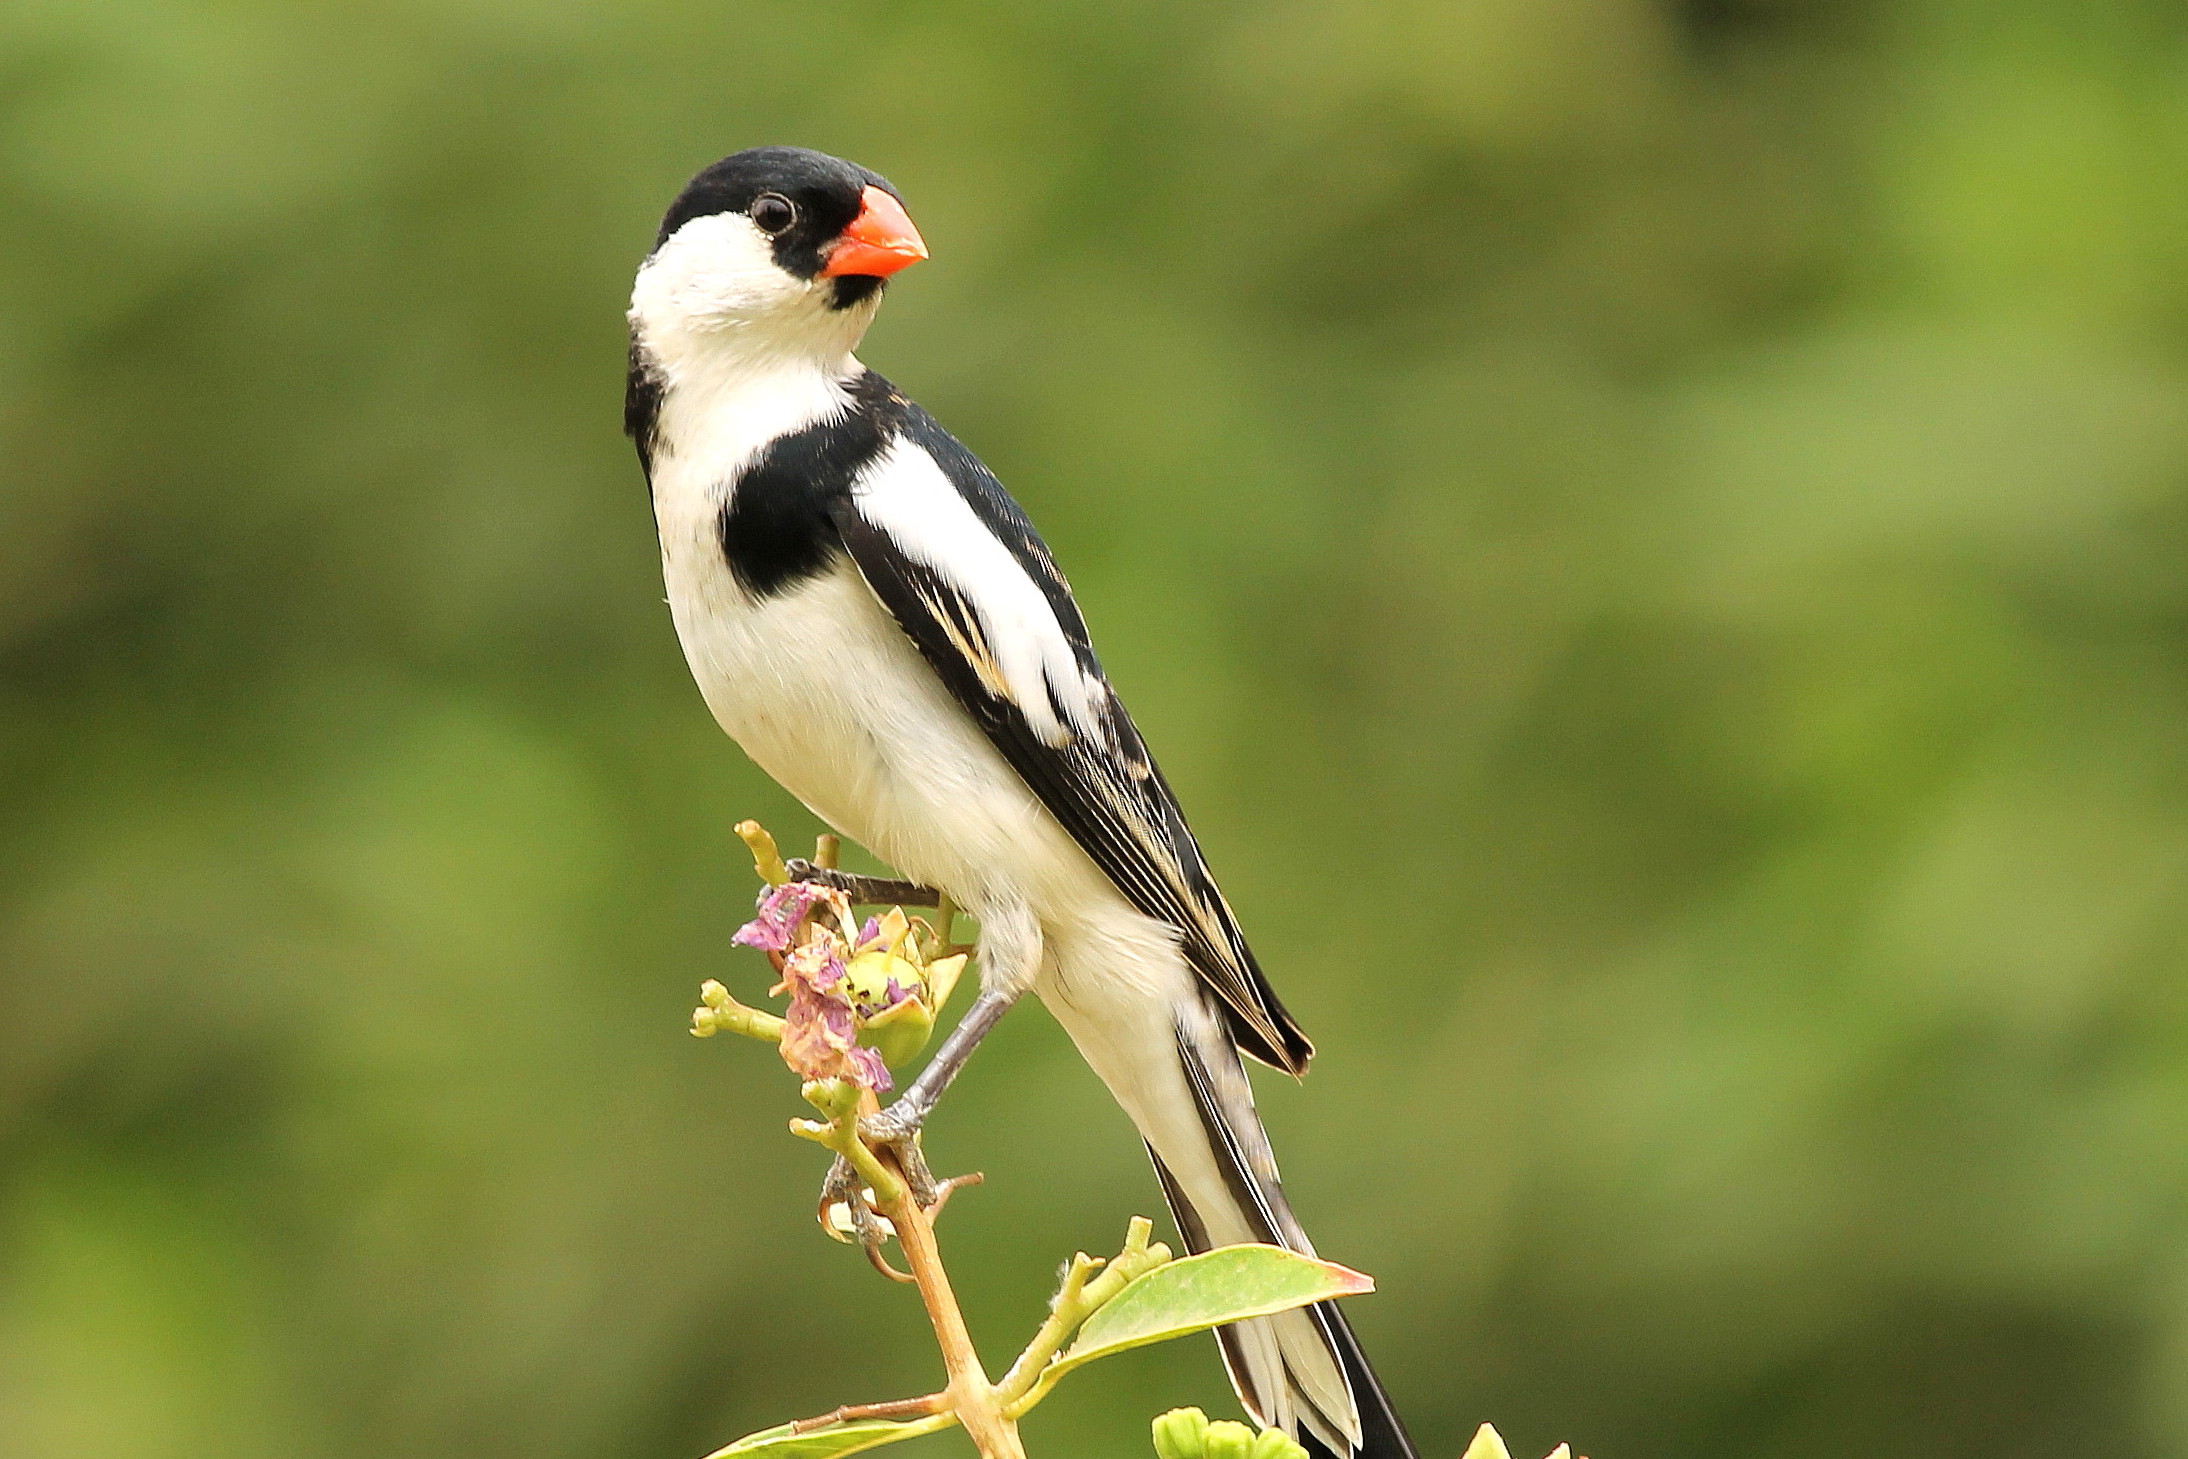 Pin-tailed whydah